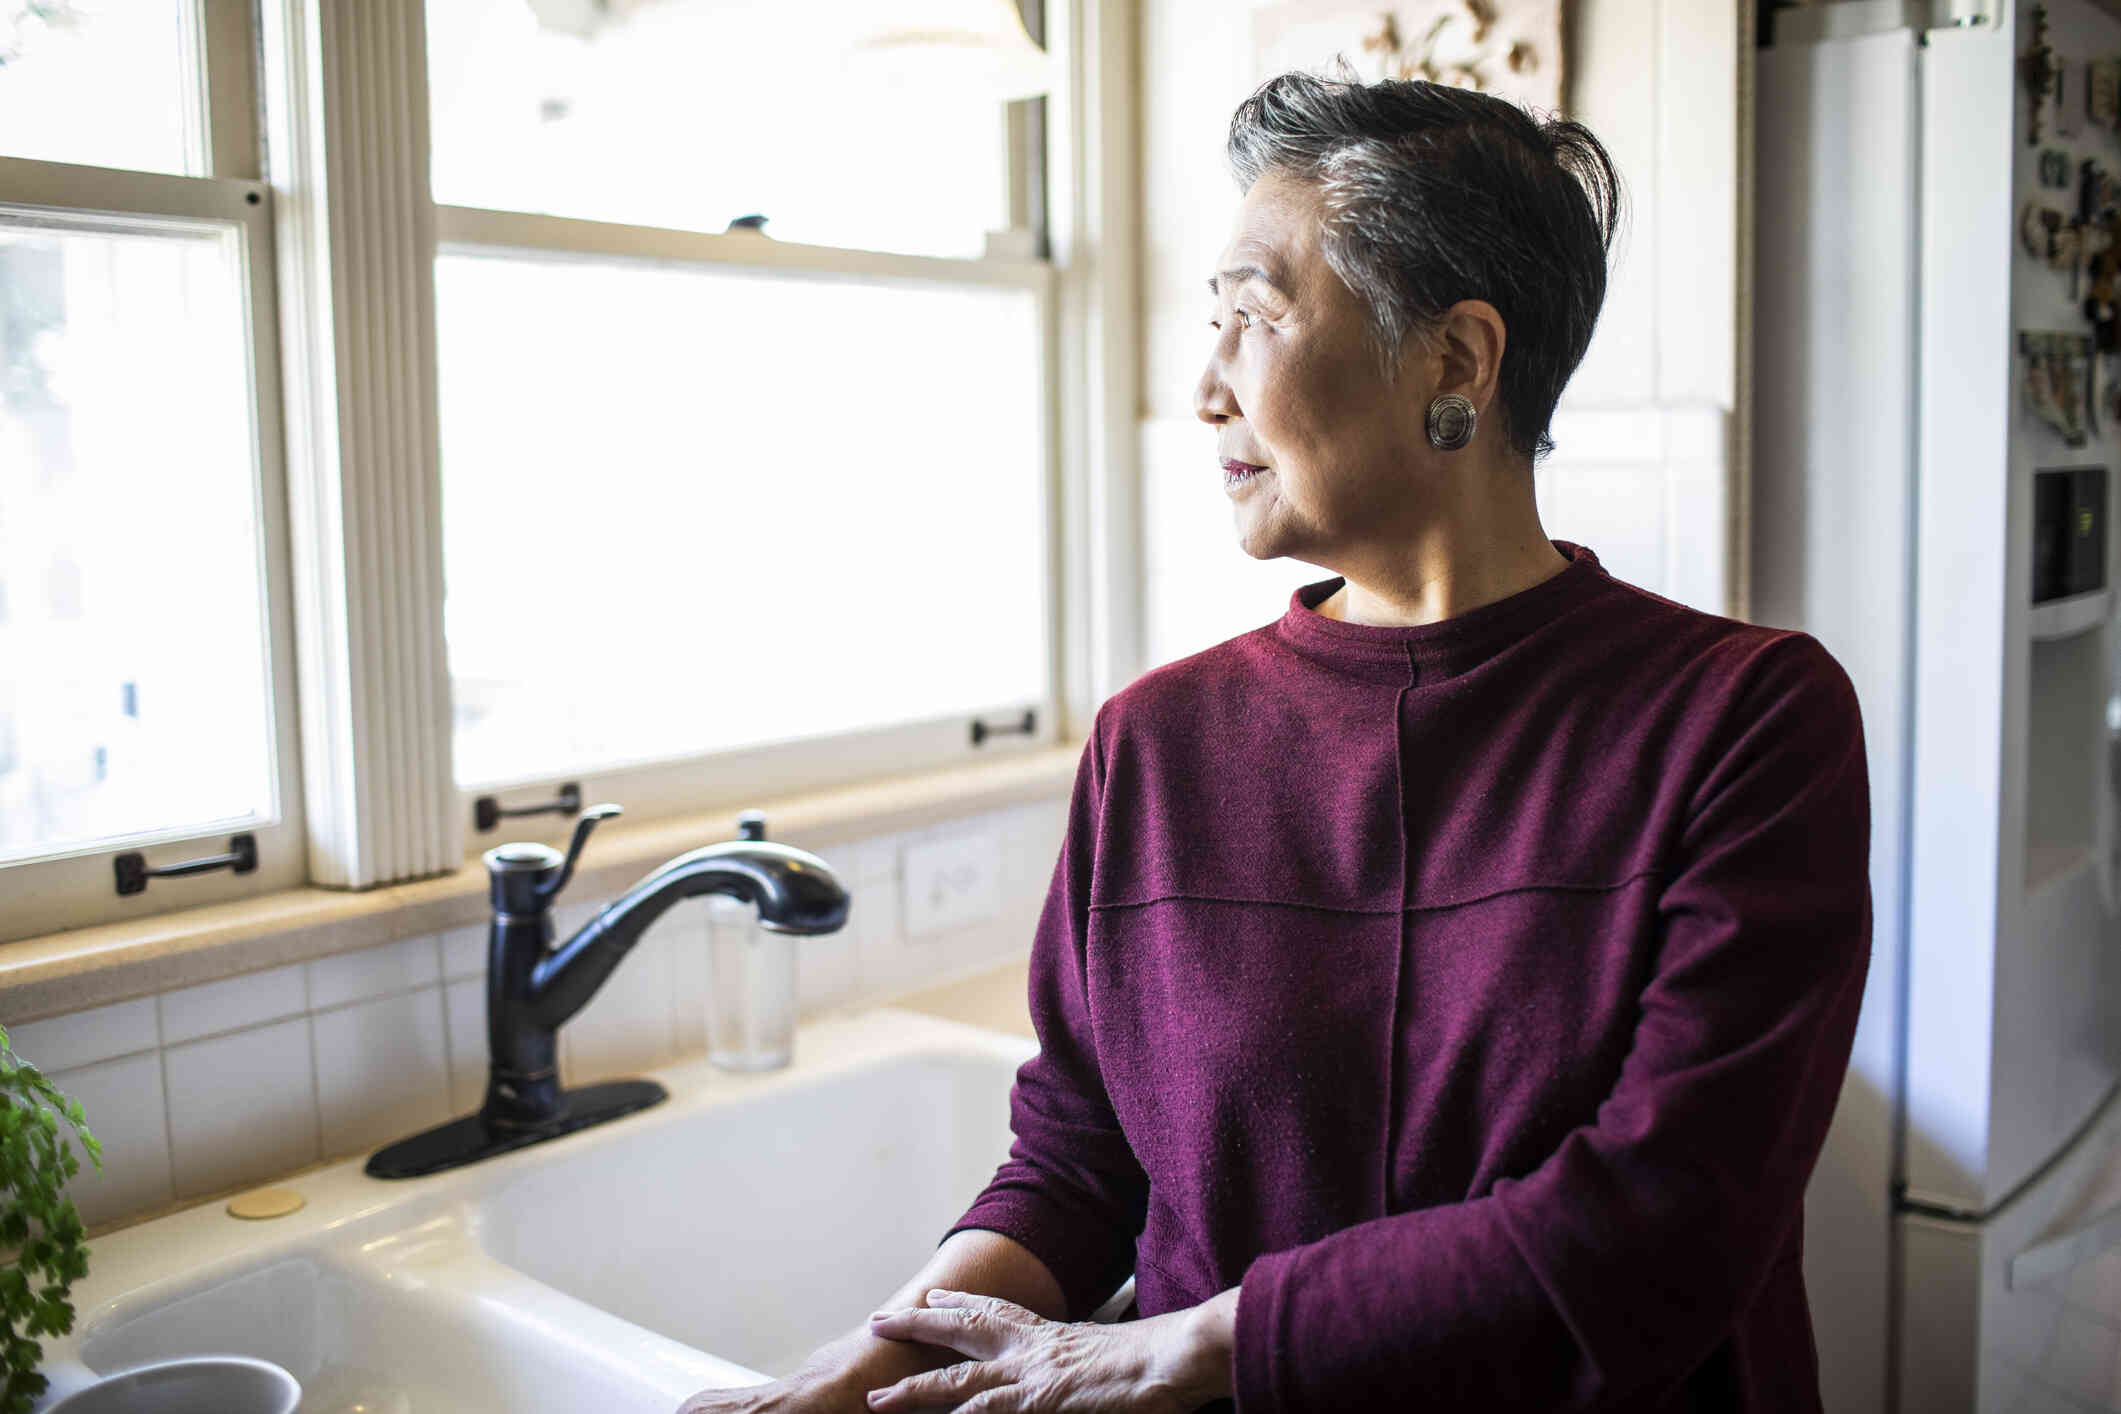 An lederly woman in a purple sweater stands in her kitchen and looks out of the window while deep in thought.